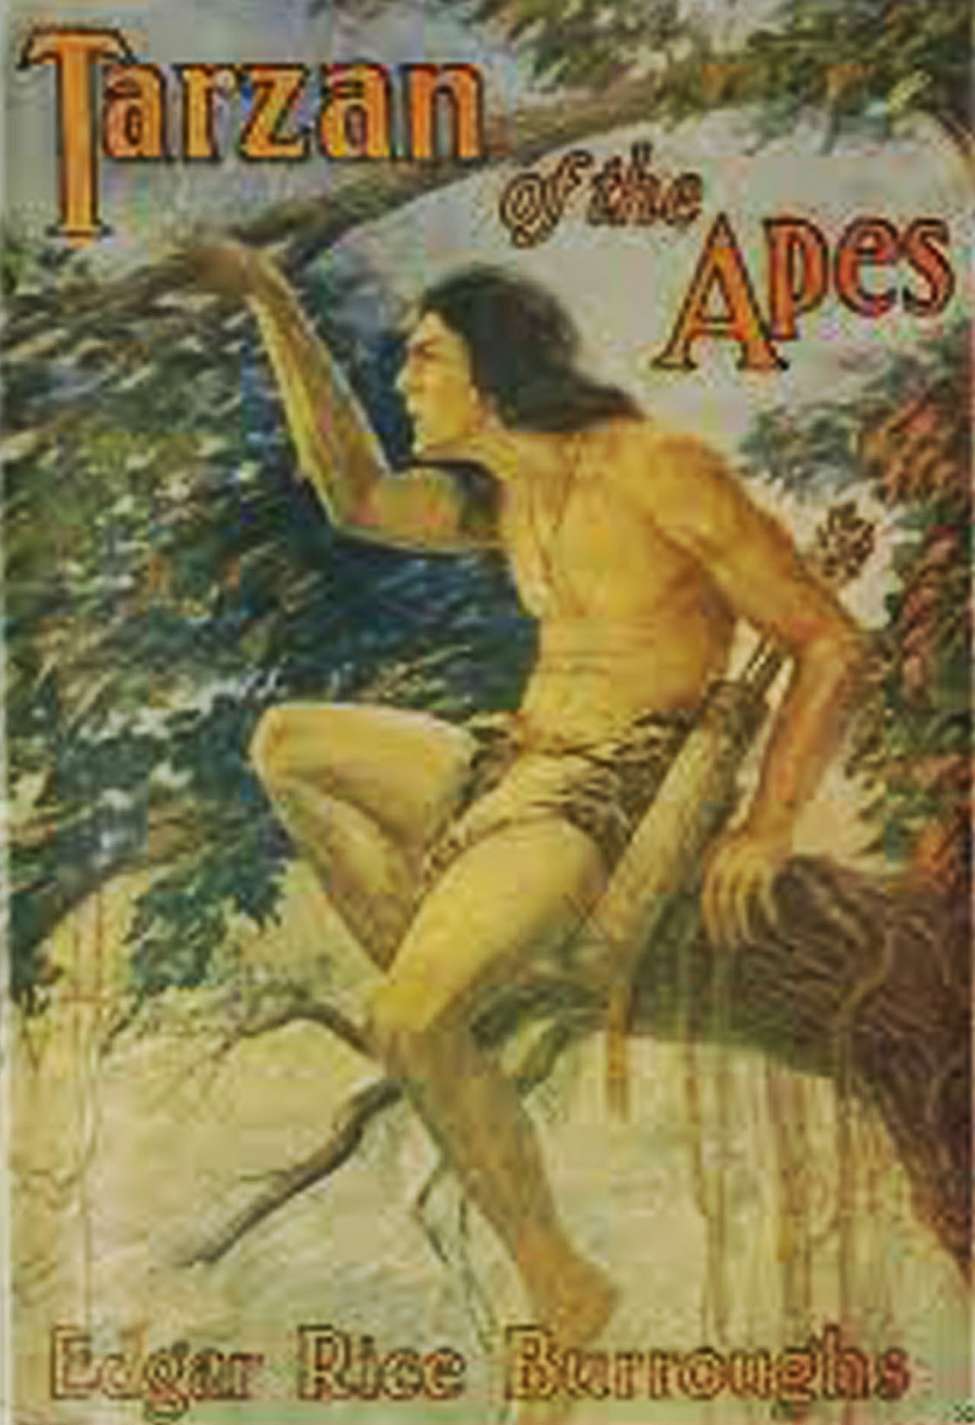 Comic Book Cover For Tarzan of the Apes (1918)